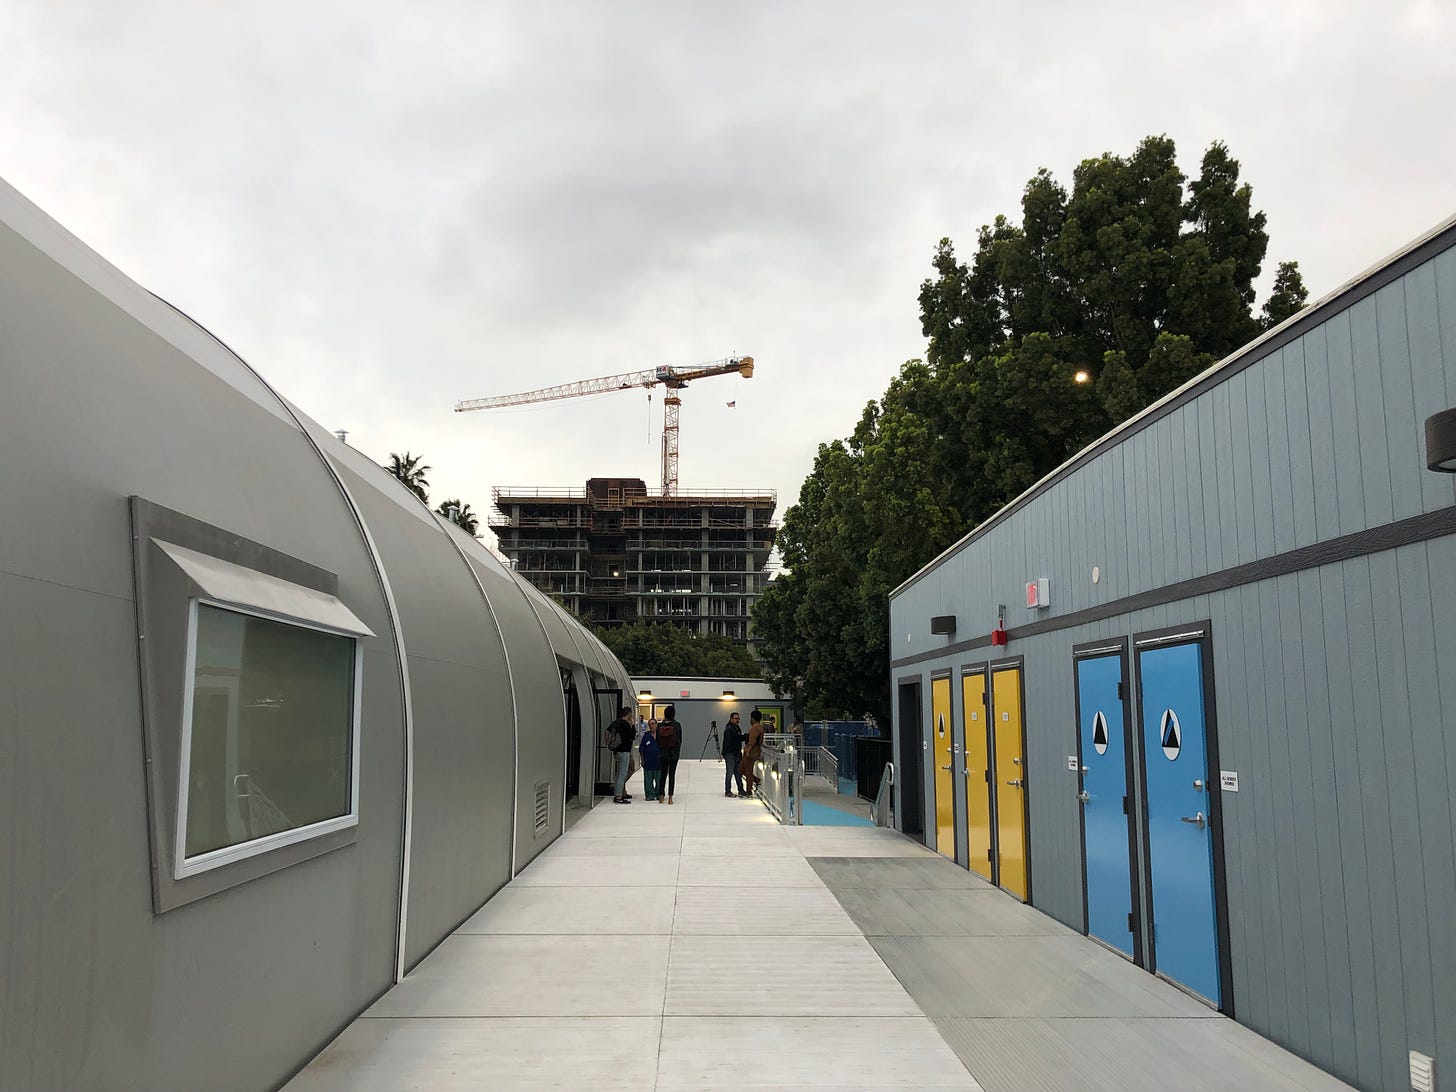 The exterior of the Schrader shelter, showing a walkway between the large tent and bathrooms in a portable building. In the background, a construction crane builds a high rise apartment building.